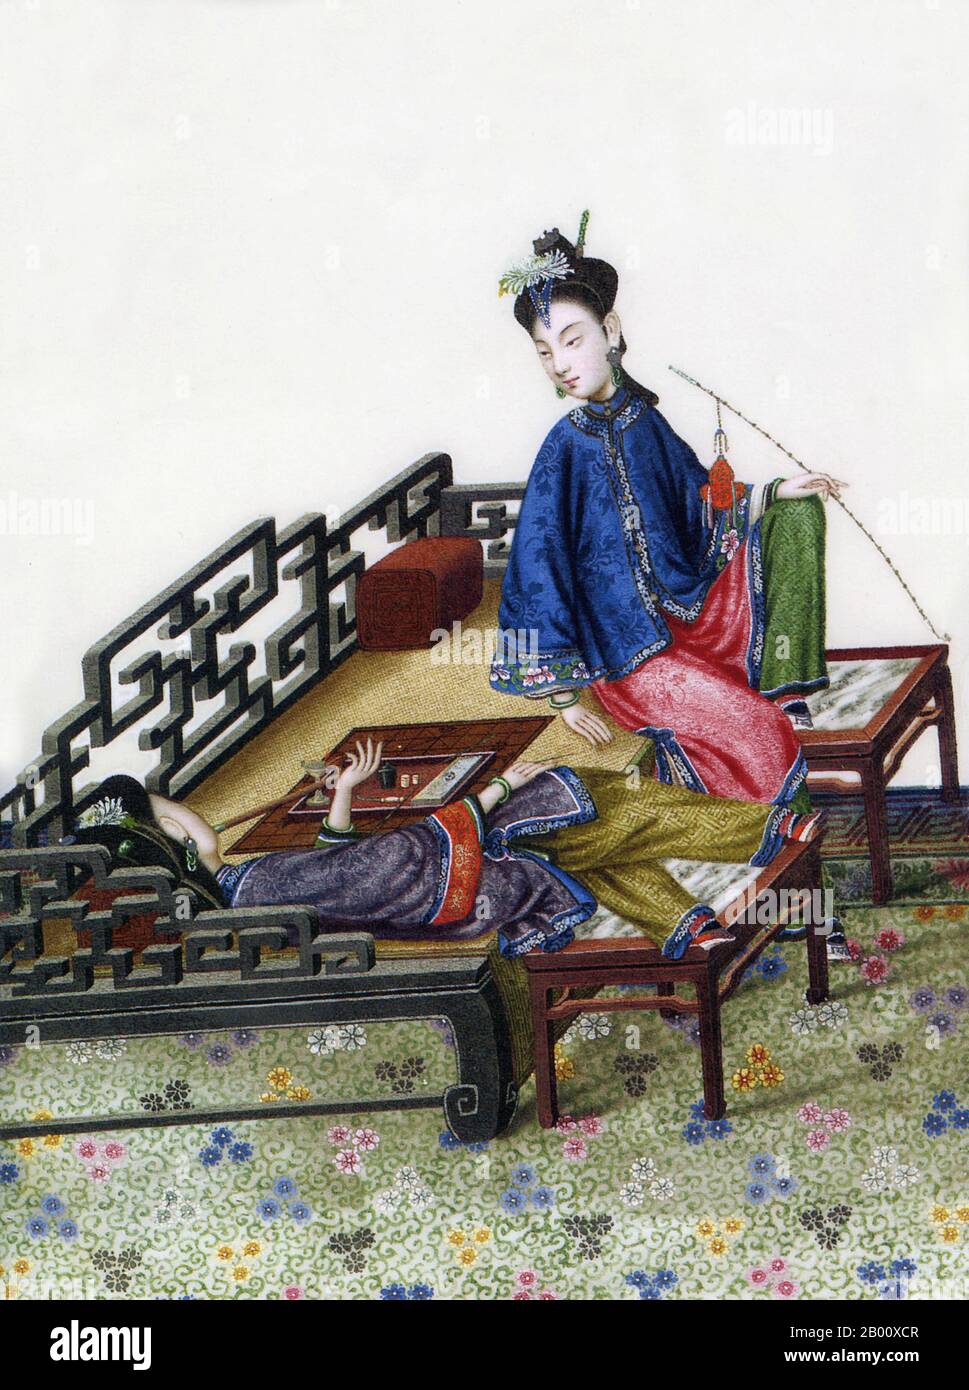 China: Two ladies smoking opium, late Qing Dynasty painting.  The Qing Dynasty (1644–1911) was founded after the Manchus defeated the Ming, the last Han Chinese dynasty. The Manchus introduced a 'queue order', forcing the Han Chinese to adopt the Manchu queue hairstyle and Manchu-style clothing.  The Qing consolidated control of some areas originally under the Ming, including Yunnan. They also stretched their sphere of influence over Xinjiang, Tibet and Mongolia. But during the 19th century, Qing control weakened, and it collapsed in 1912, replaced by the Republic of China. Stock Photo